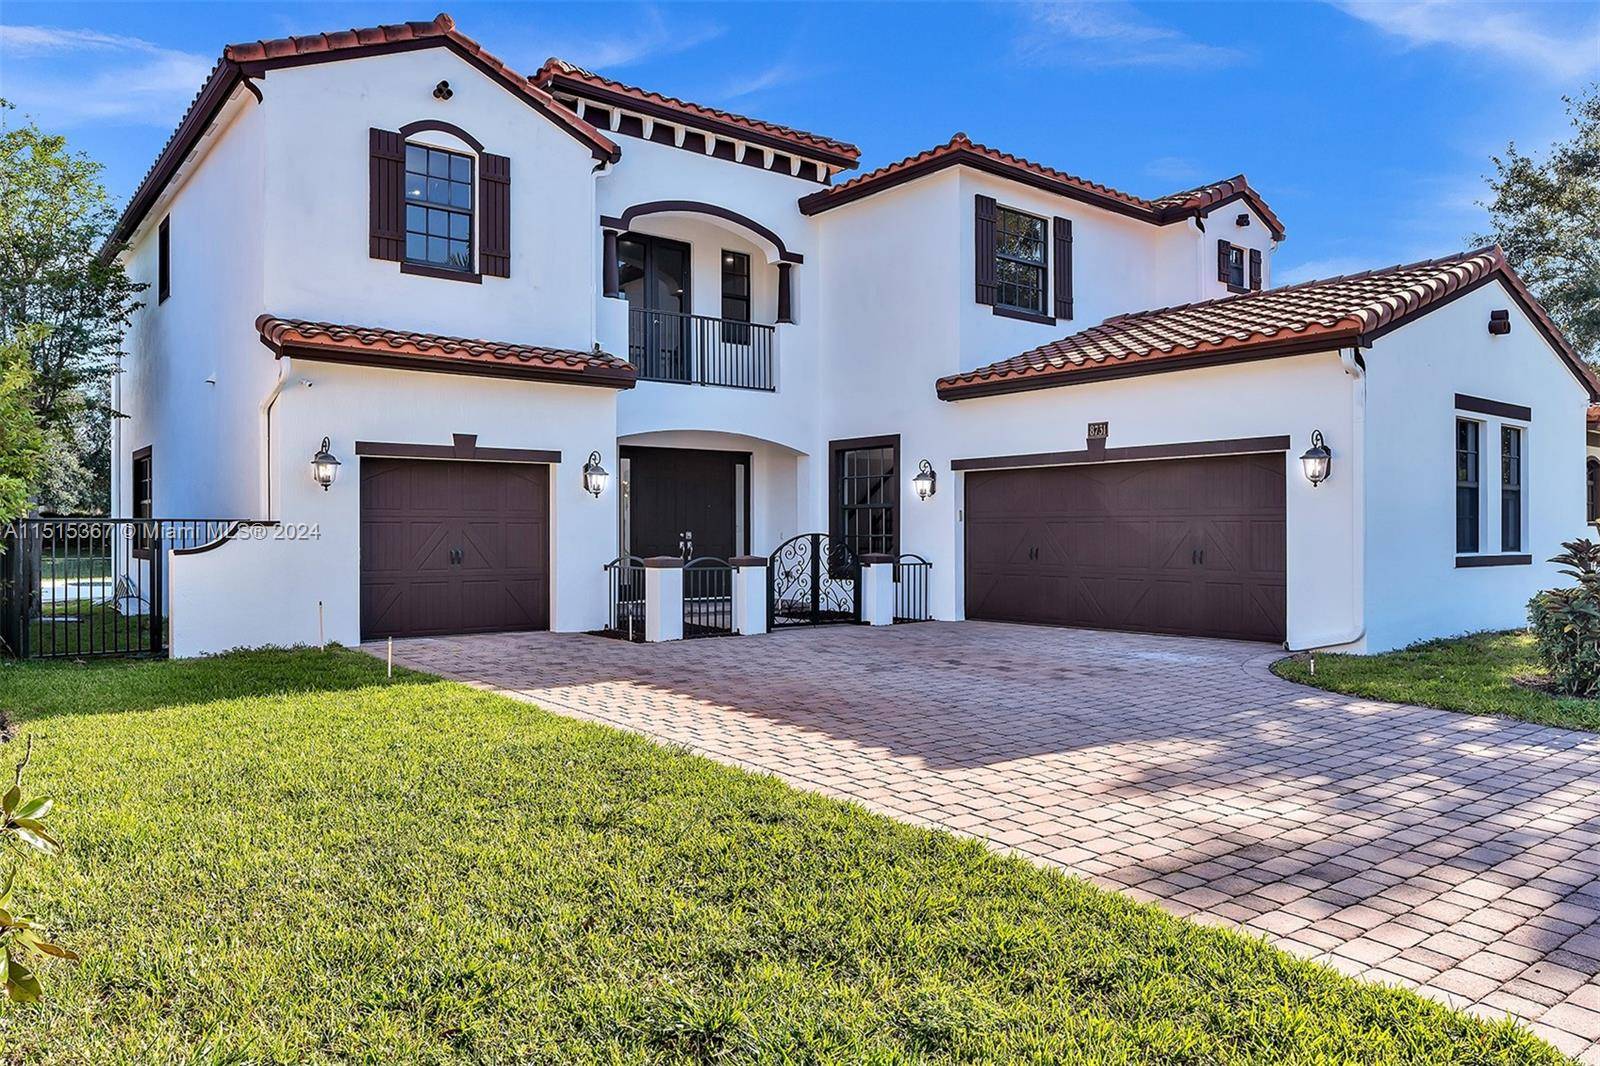 Welcome to the prestigious Estada community located in highly desirable Cooper City.